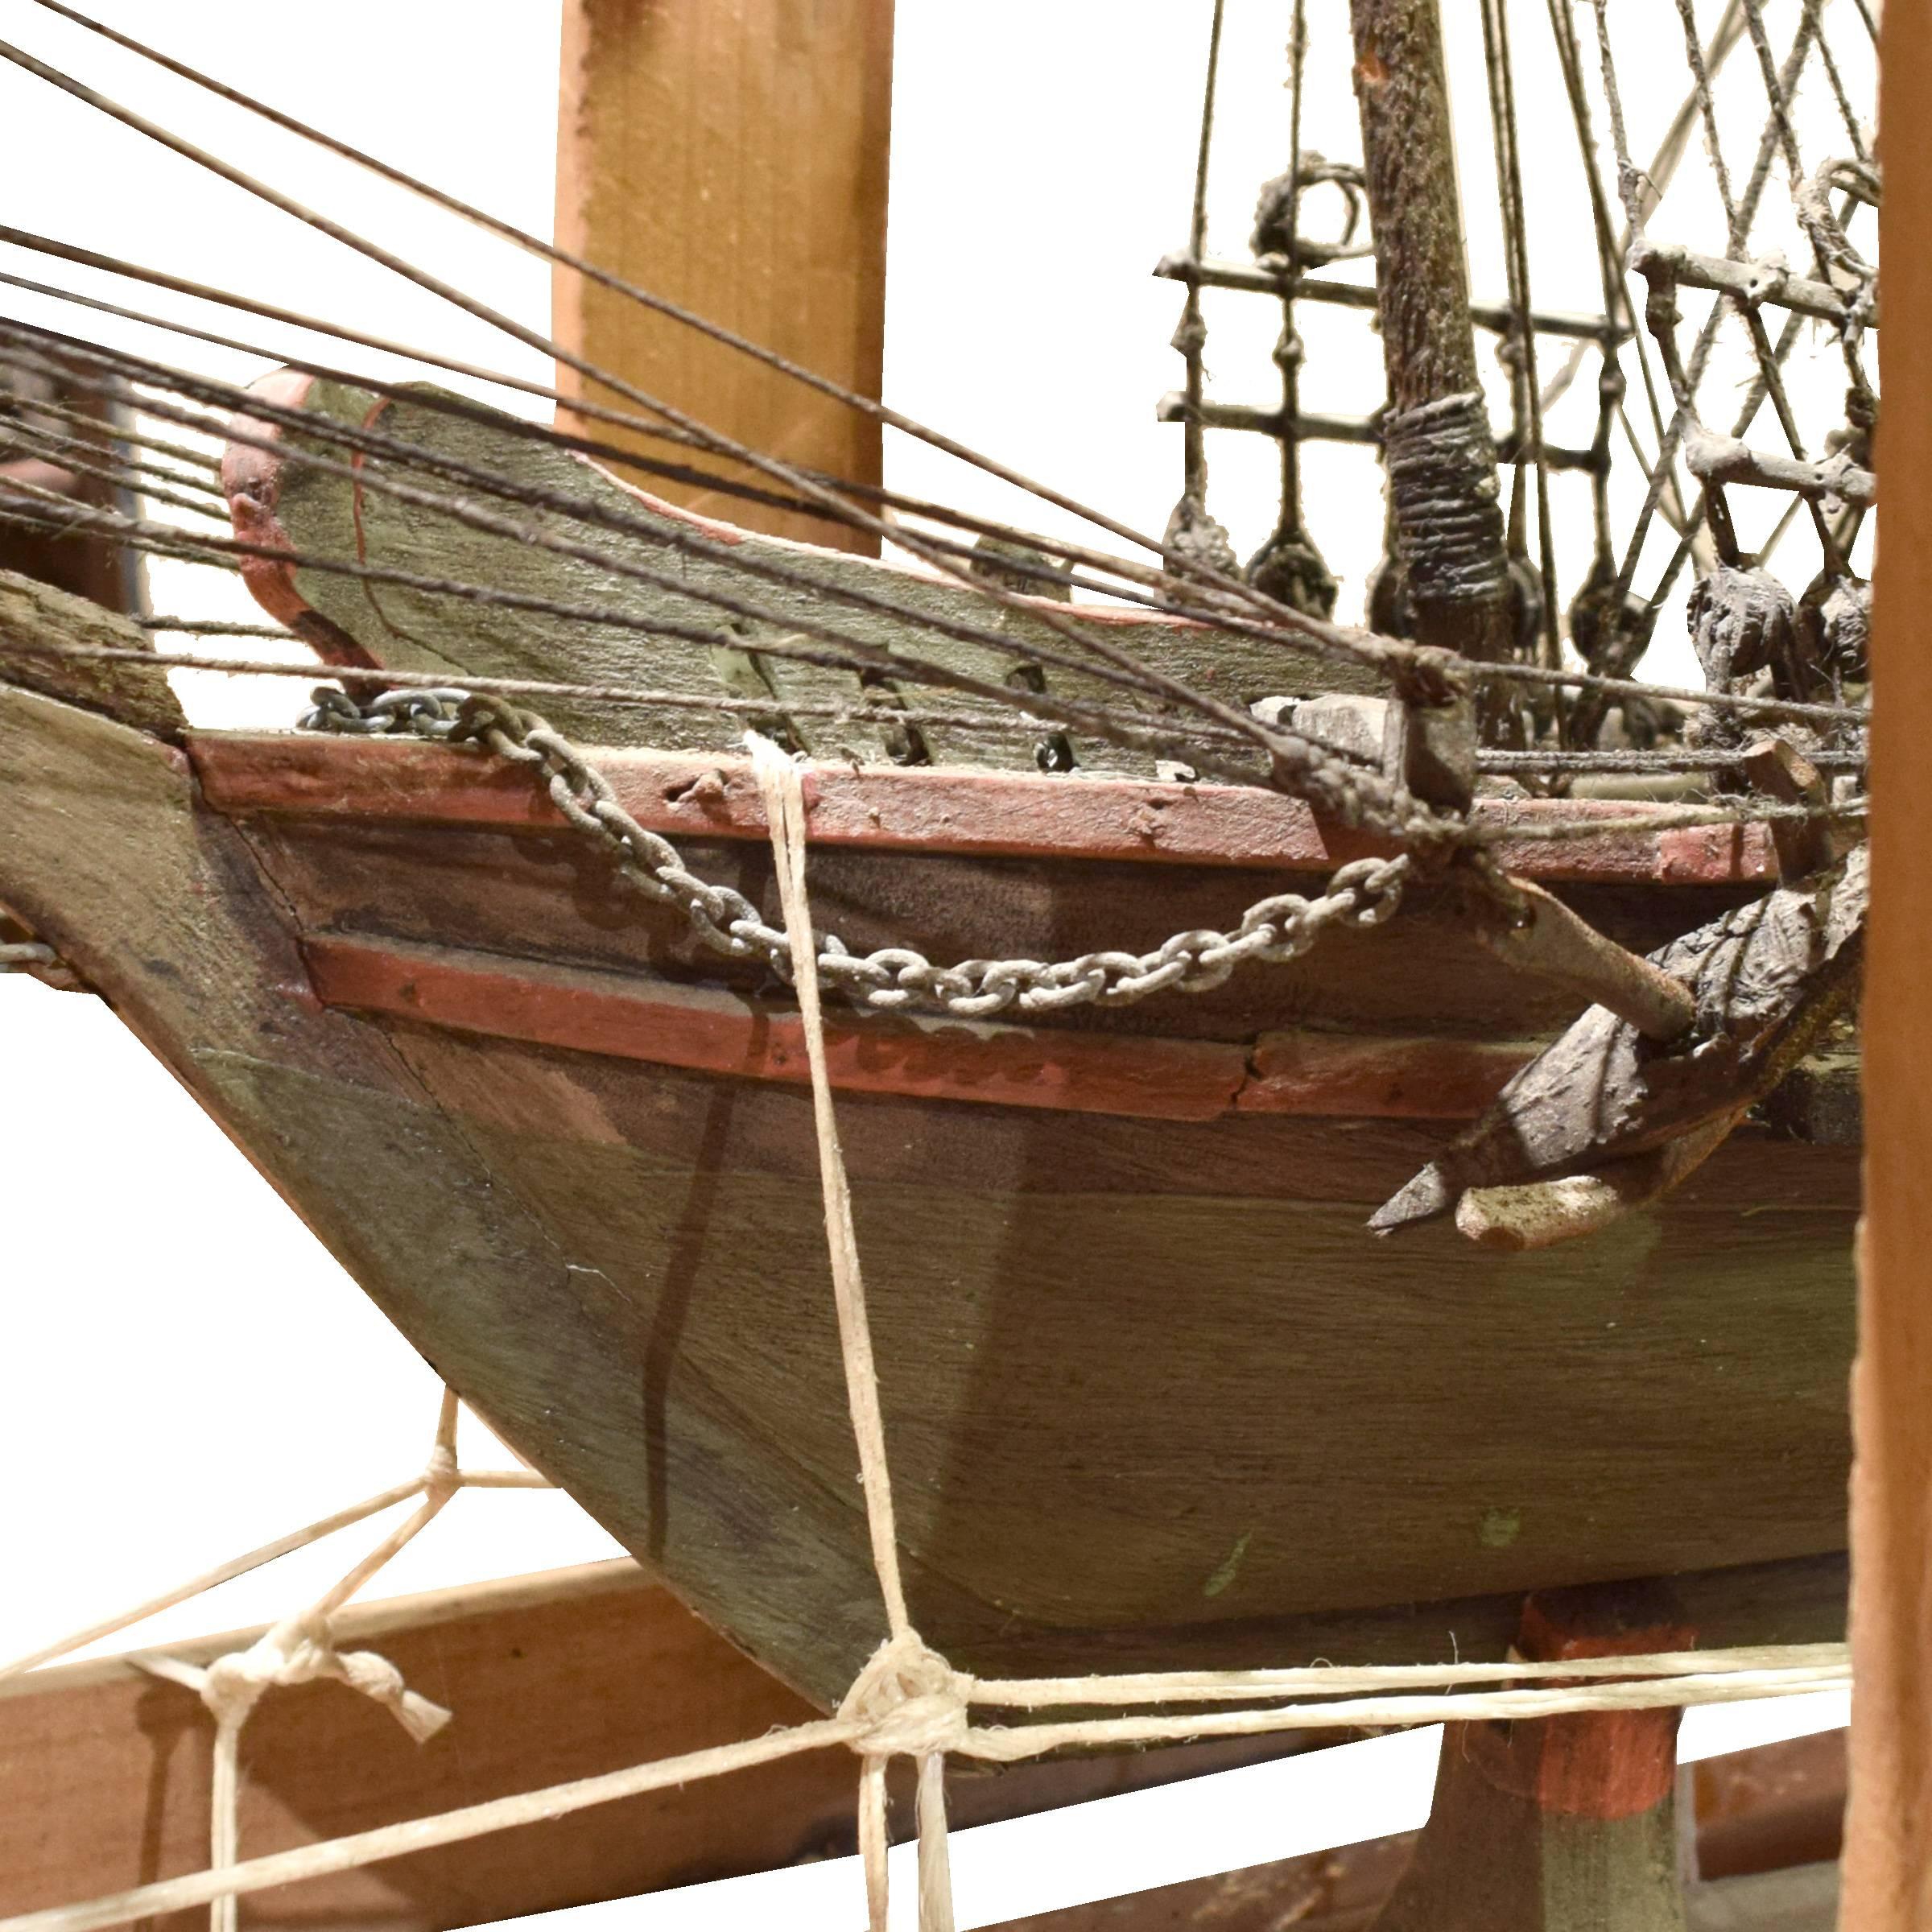 A beautifully crafted and highly detailed French handmade model ship in its original crate.